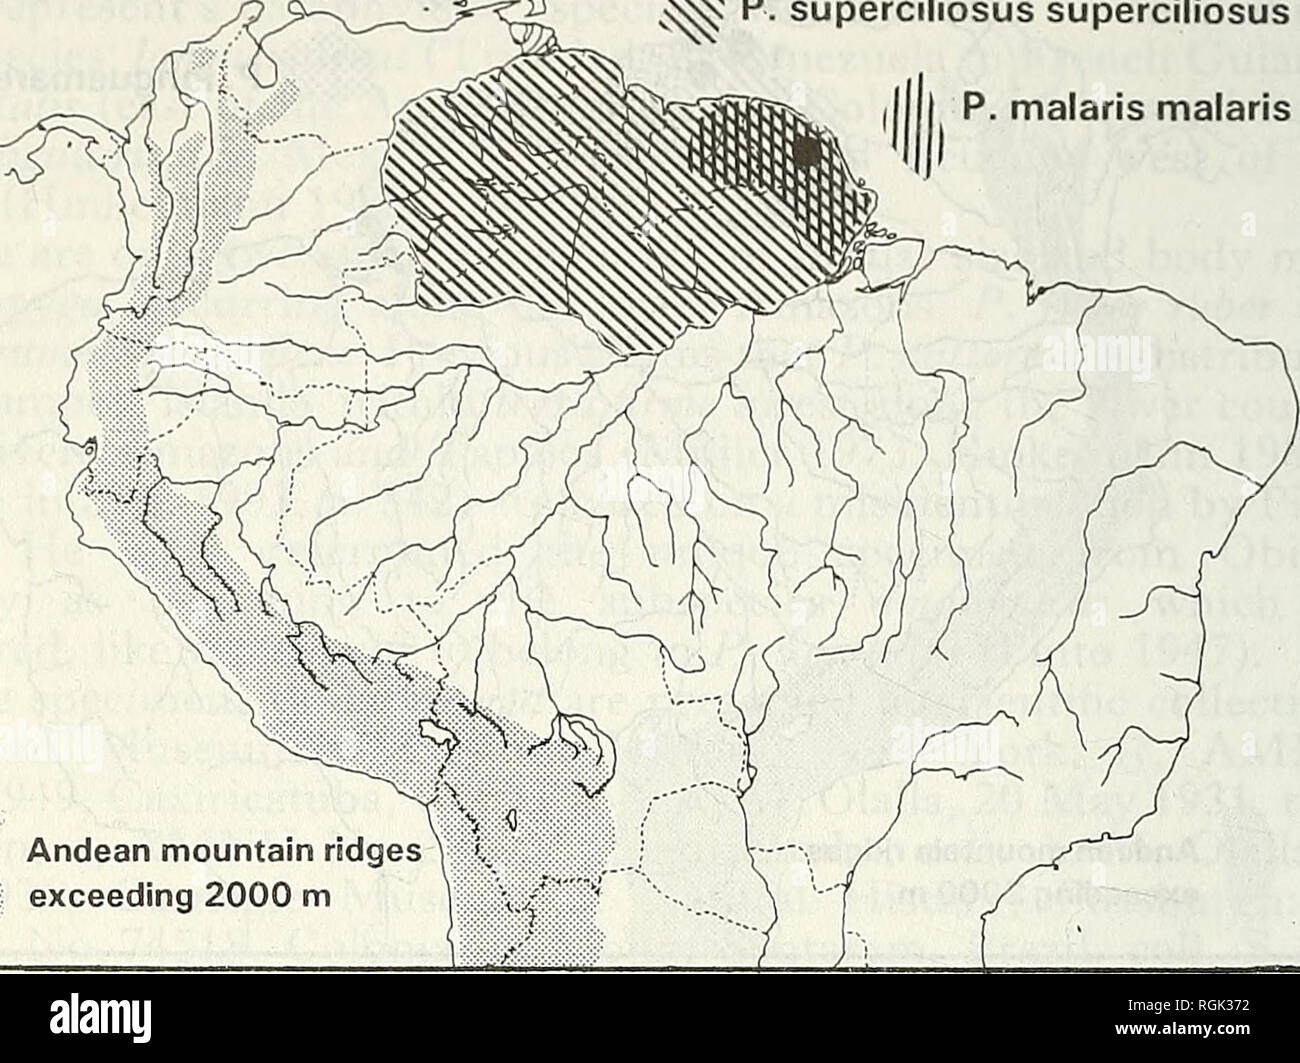 . Bulletin of the British Ornithologists' Club. Birds. C. Hinkehnann 10 Bull. B.O.C. 1996 116(1) '&amp; §S$ P. superciliosus superciliosus P. malaris malaris. Andean mountain ridges exceeding 2000 m Figure 3. Distribution of Phaethornis malaris ynalaris and Phaethornis superciliosus superciliosus. Black dot: Pied Saut, French Guiana. specimens have dark throat-feathers with pale edges producing a striped appearance, as in P. r. rupurumii, whereas in P. longuemareus they lack pale edges so that the throat appears uniformly dark. The colouration of the sides of neck is ochraceous as in longuemar Stock Photo